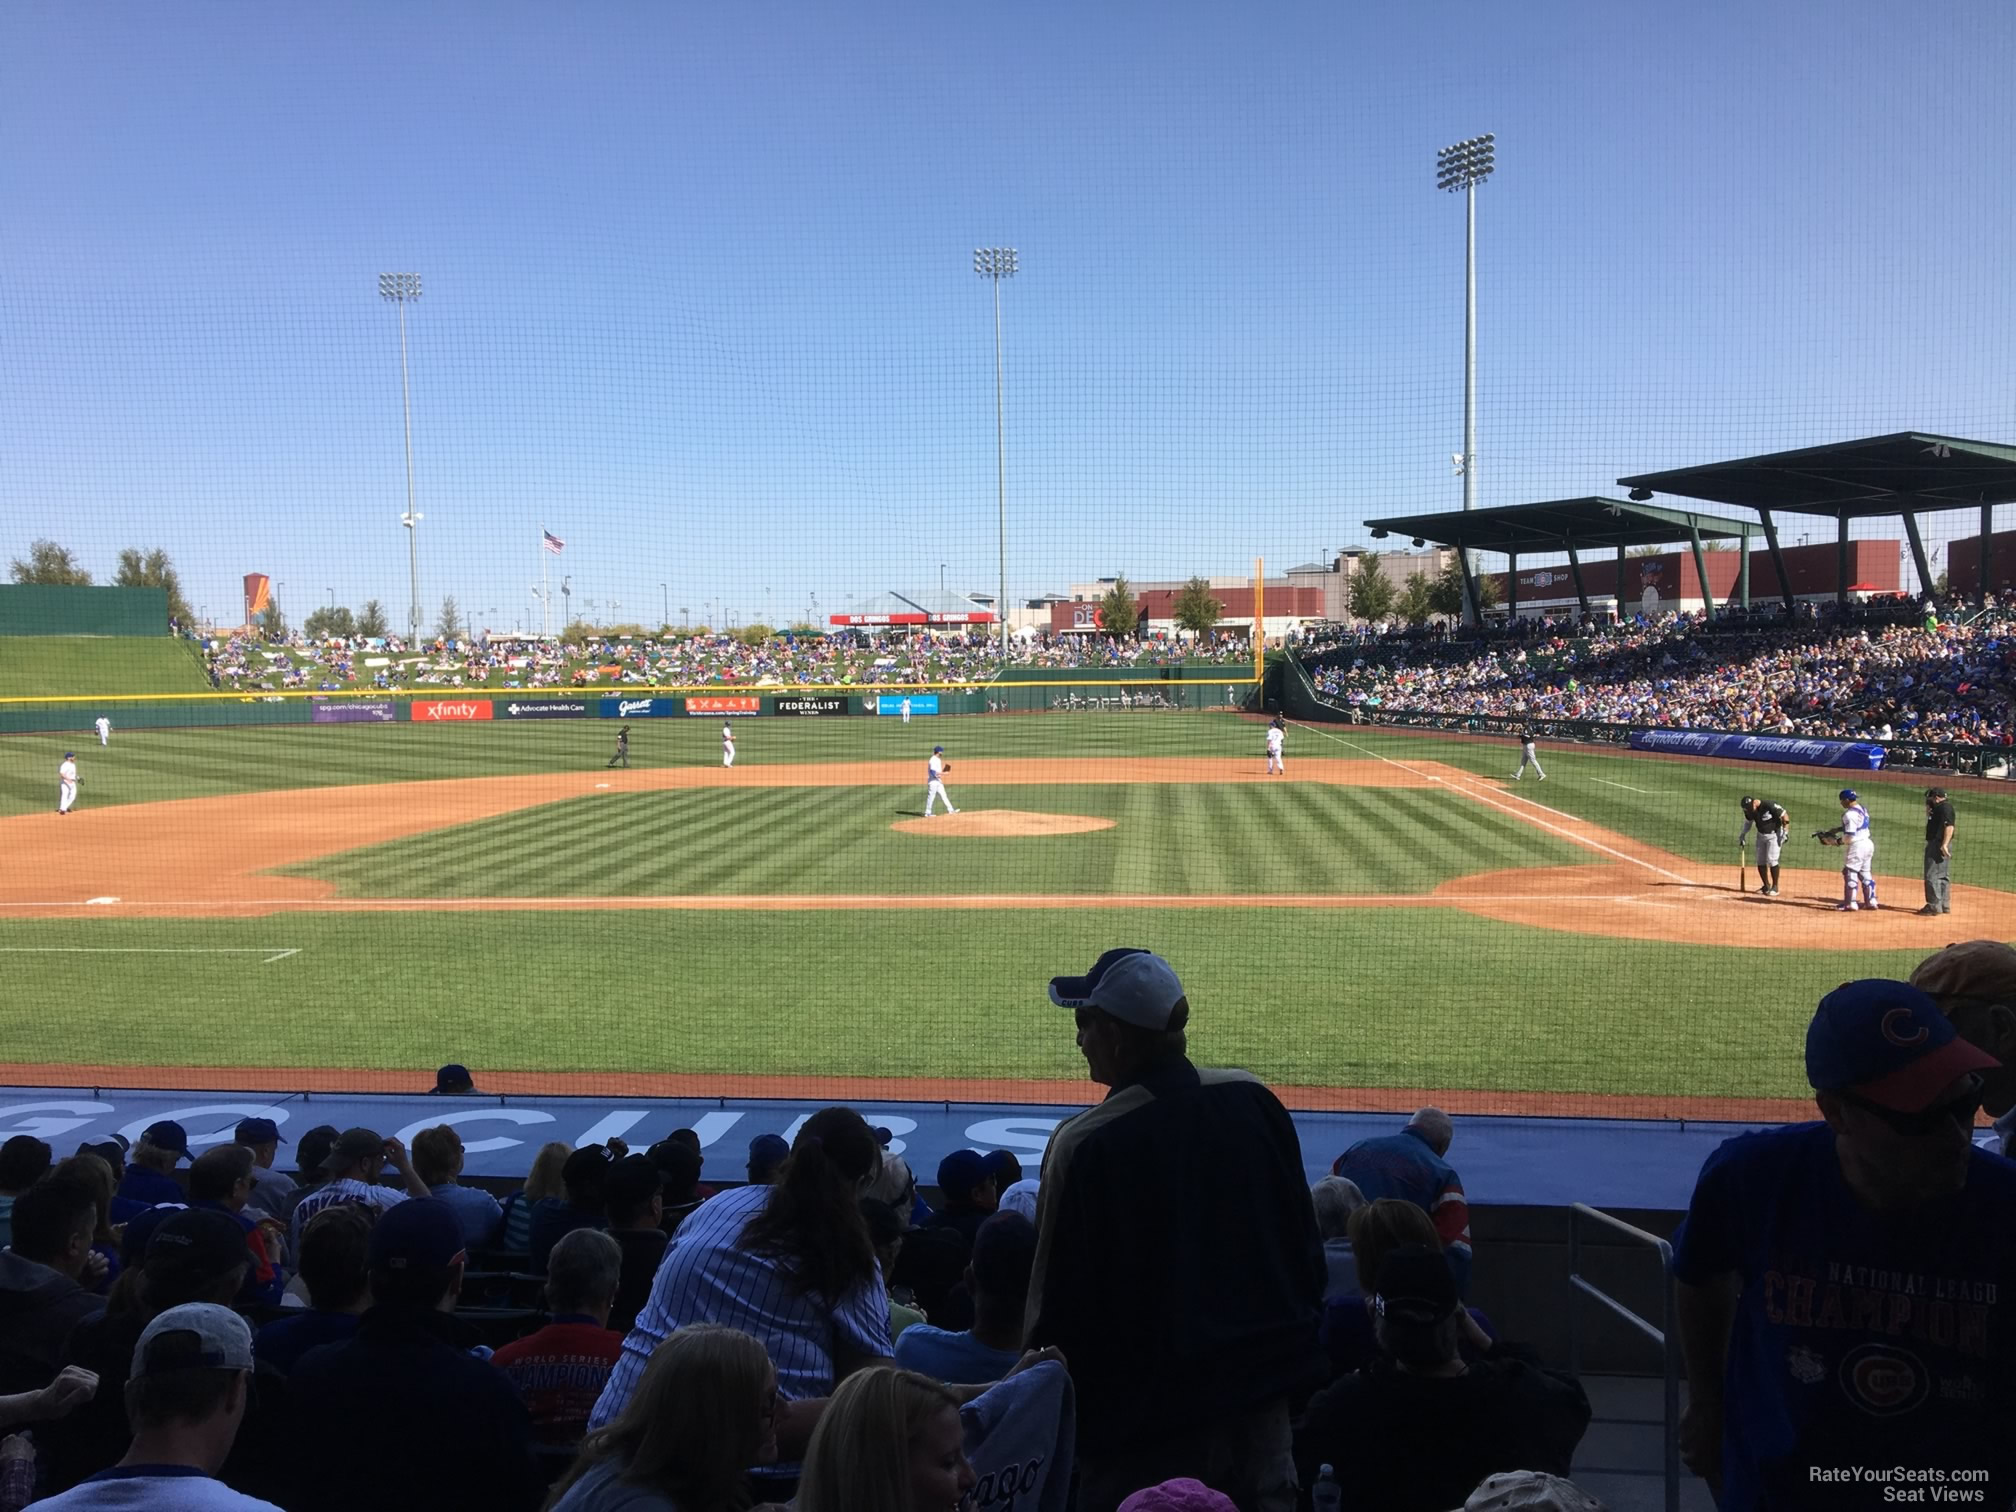 section 108, row 12 seat view  - sloan park